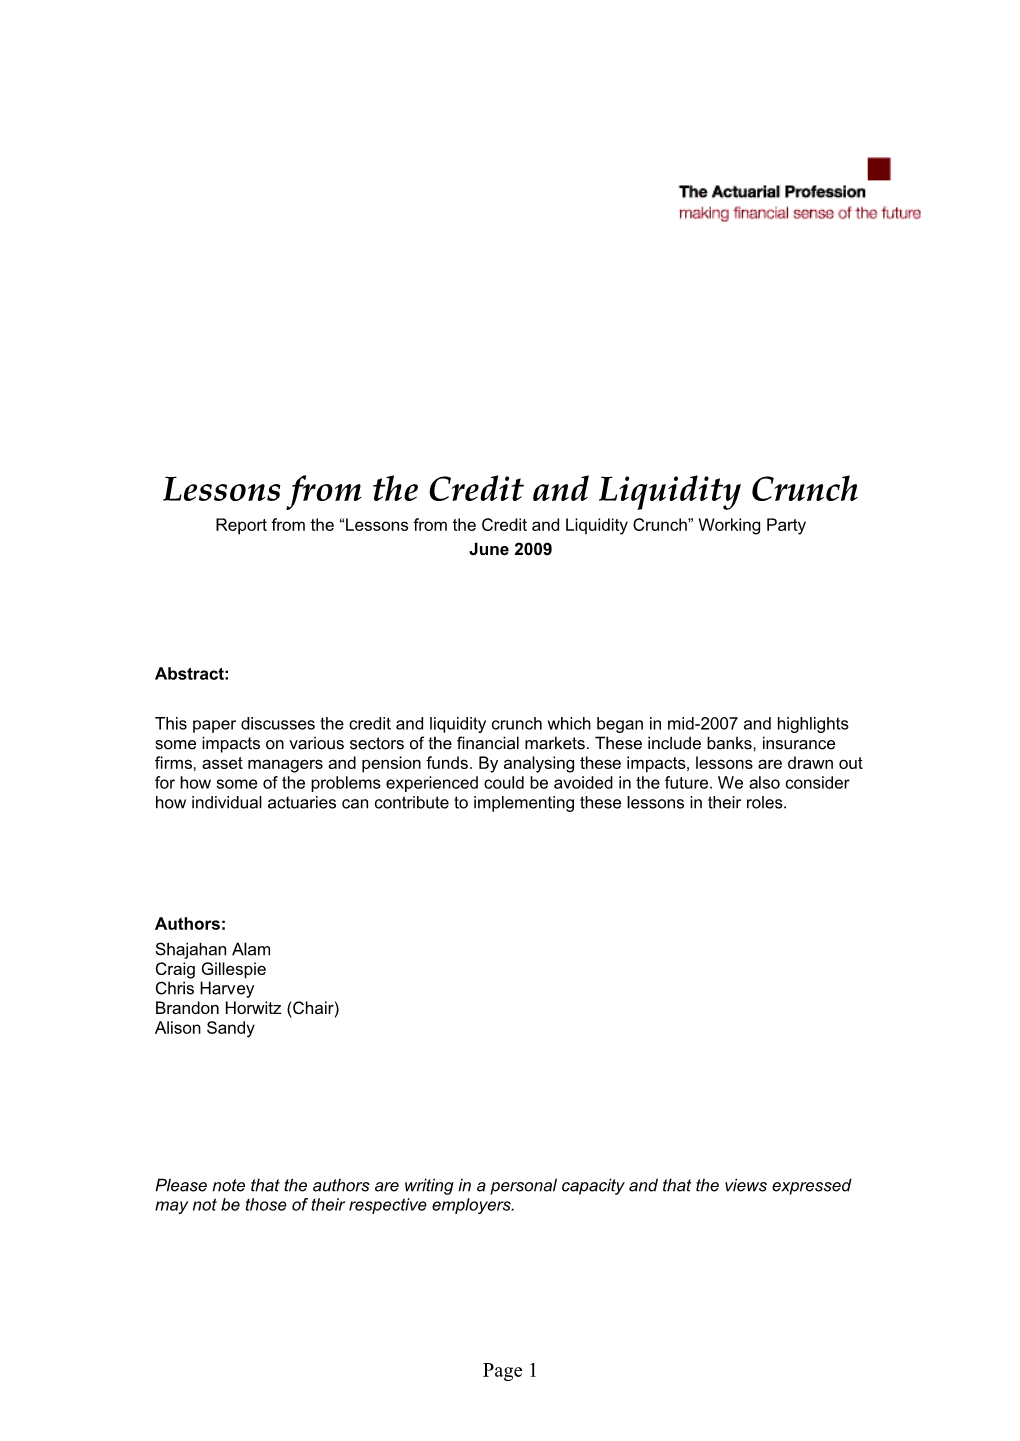 Lessons from the Credit and Liquidity Crunch Report from the “Lessons from the Credit and Liquidity Crunch” Working Party June 2009